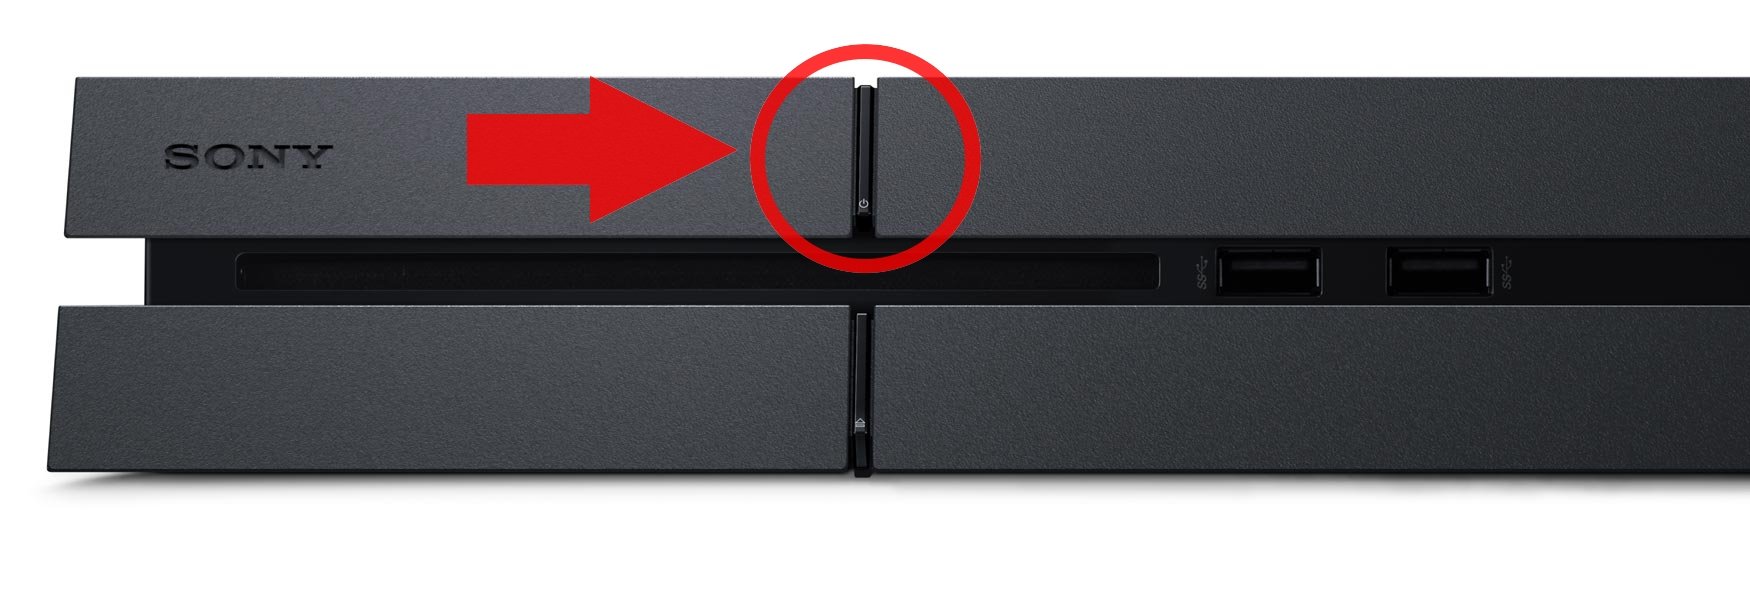 Ps4 ремонтundefined. Sony PS 4 button Touch. PLAYSTATION 4 CUH-1007a. Ps4 Slim коробка. PLAYSTATION 4 вид спереди.